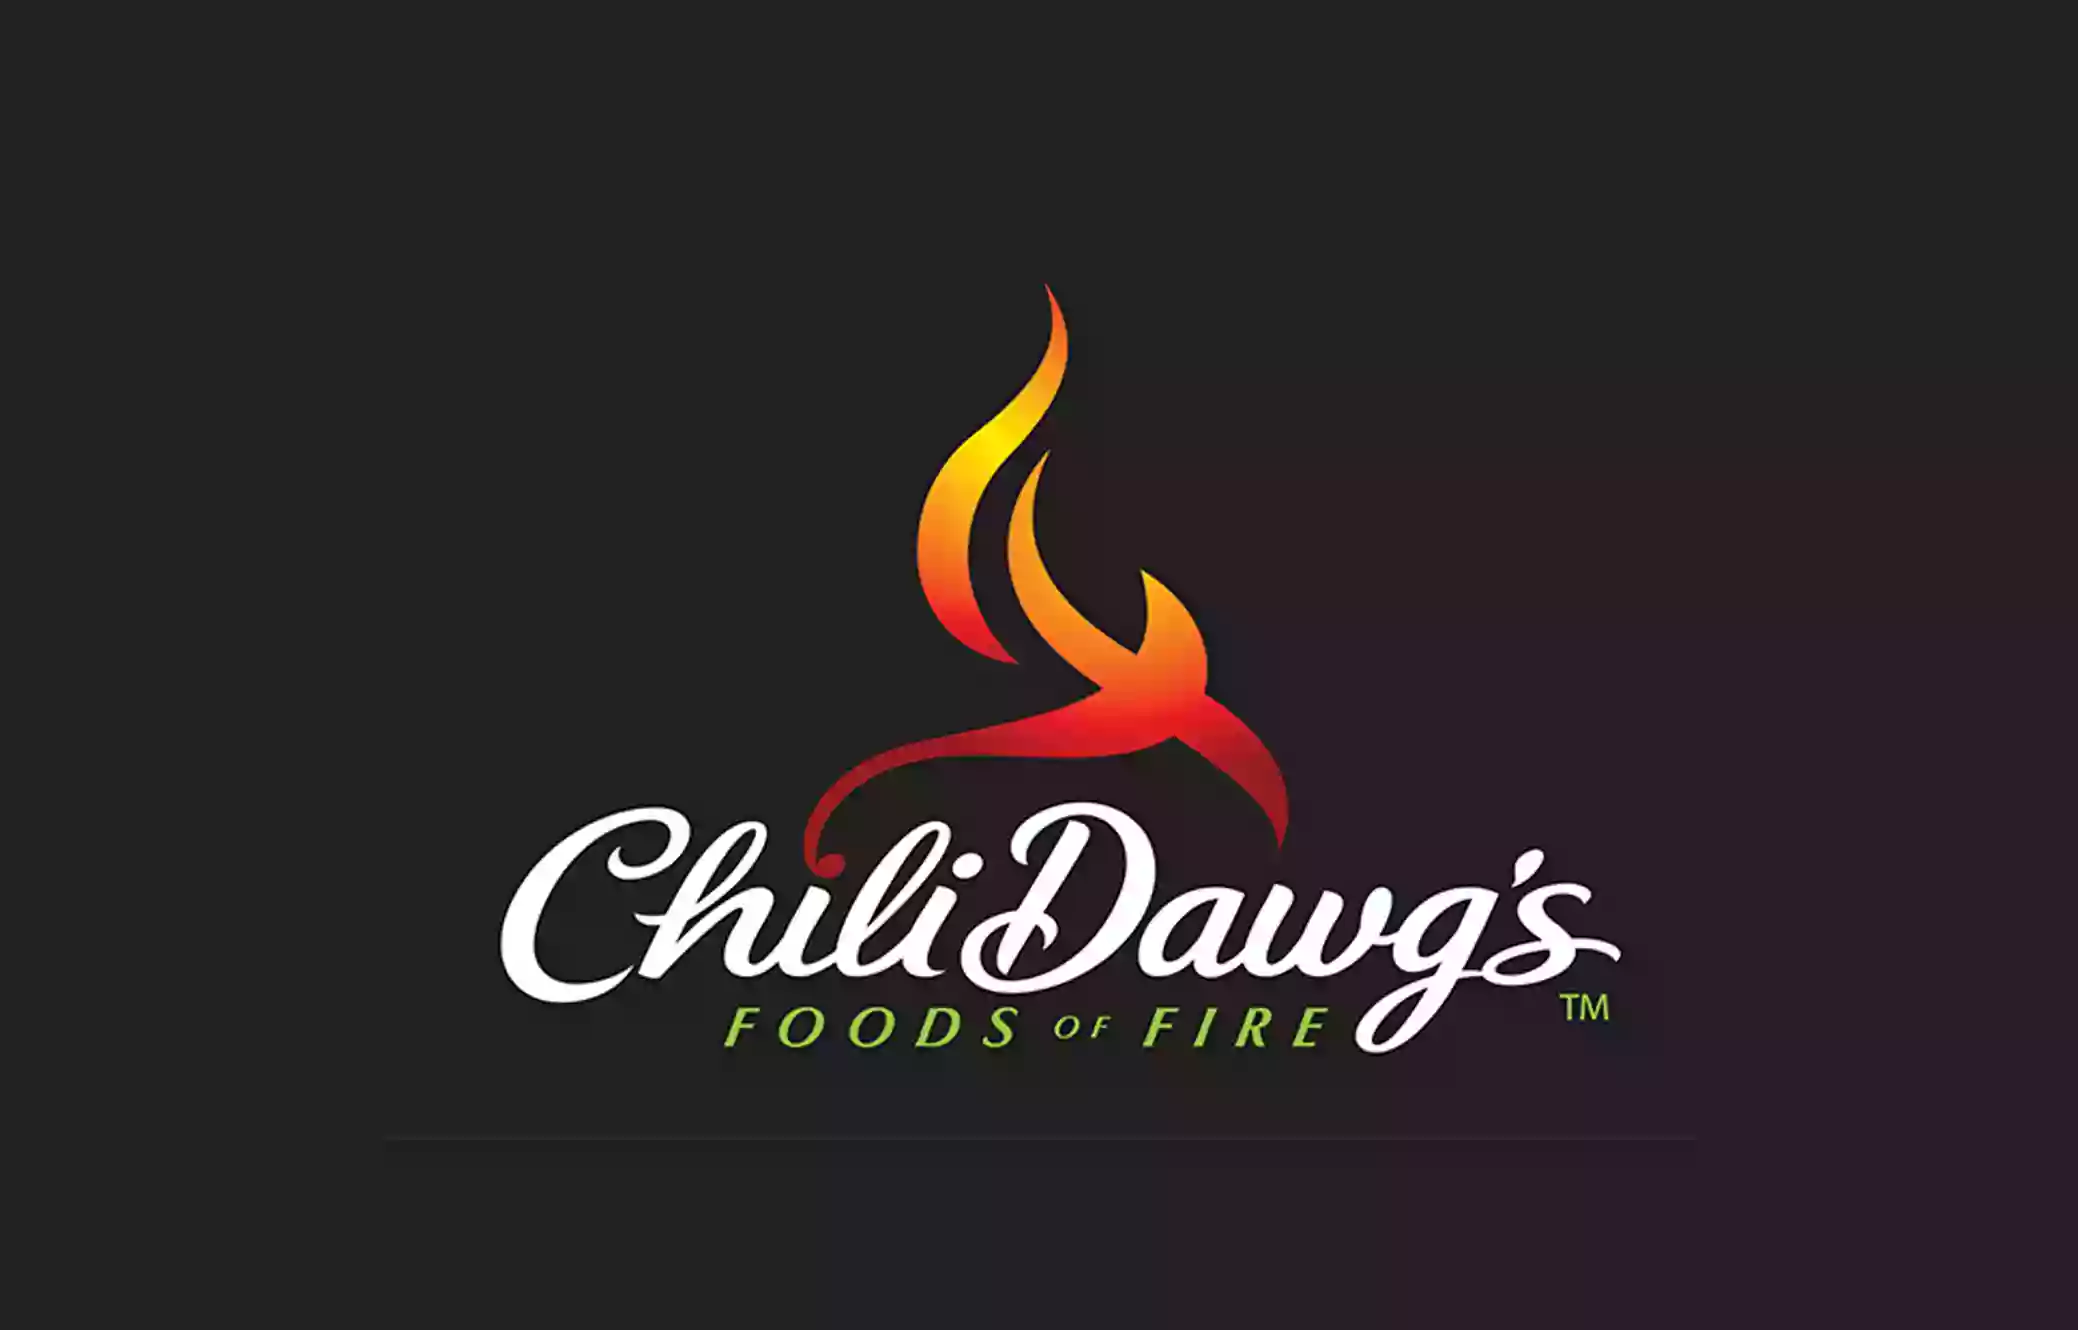 Chili Dawg's Foods Of Fire